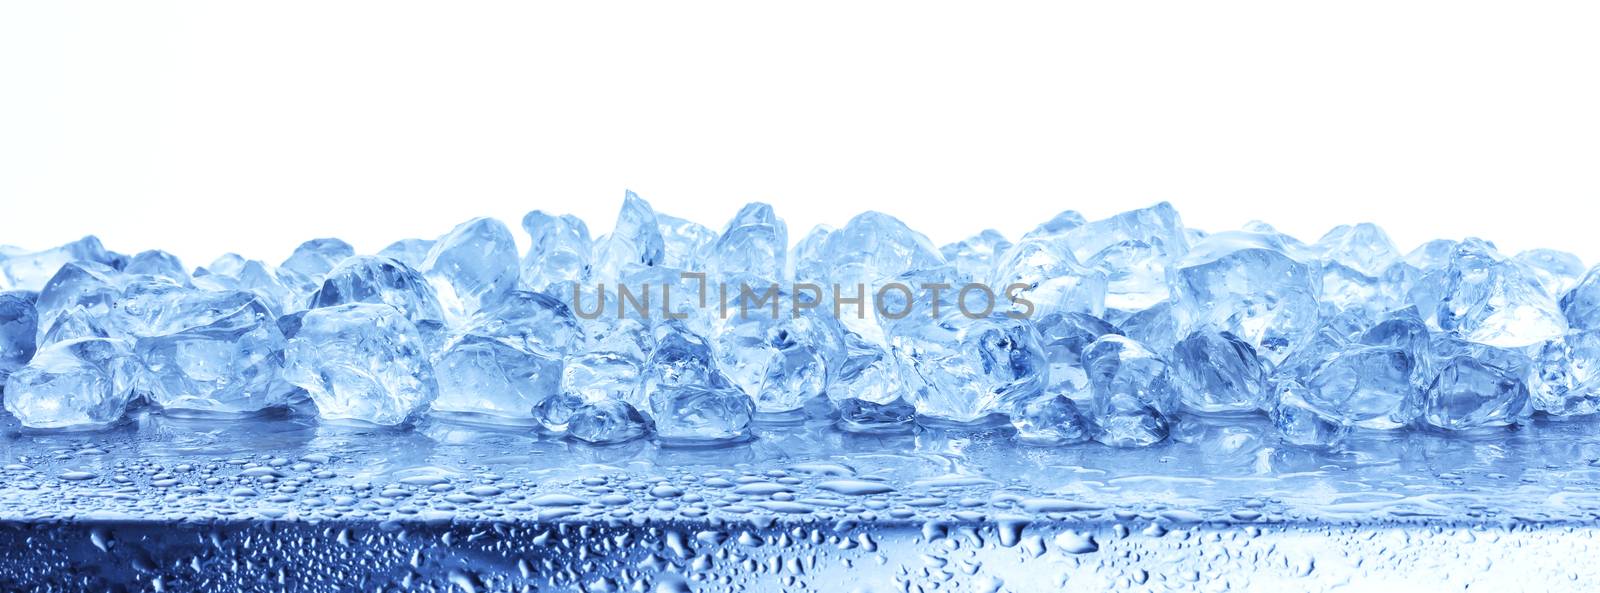 Heap of crushed ice isolated on white background with copy space